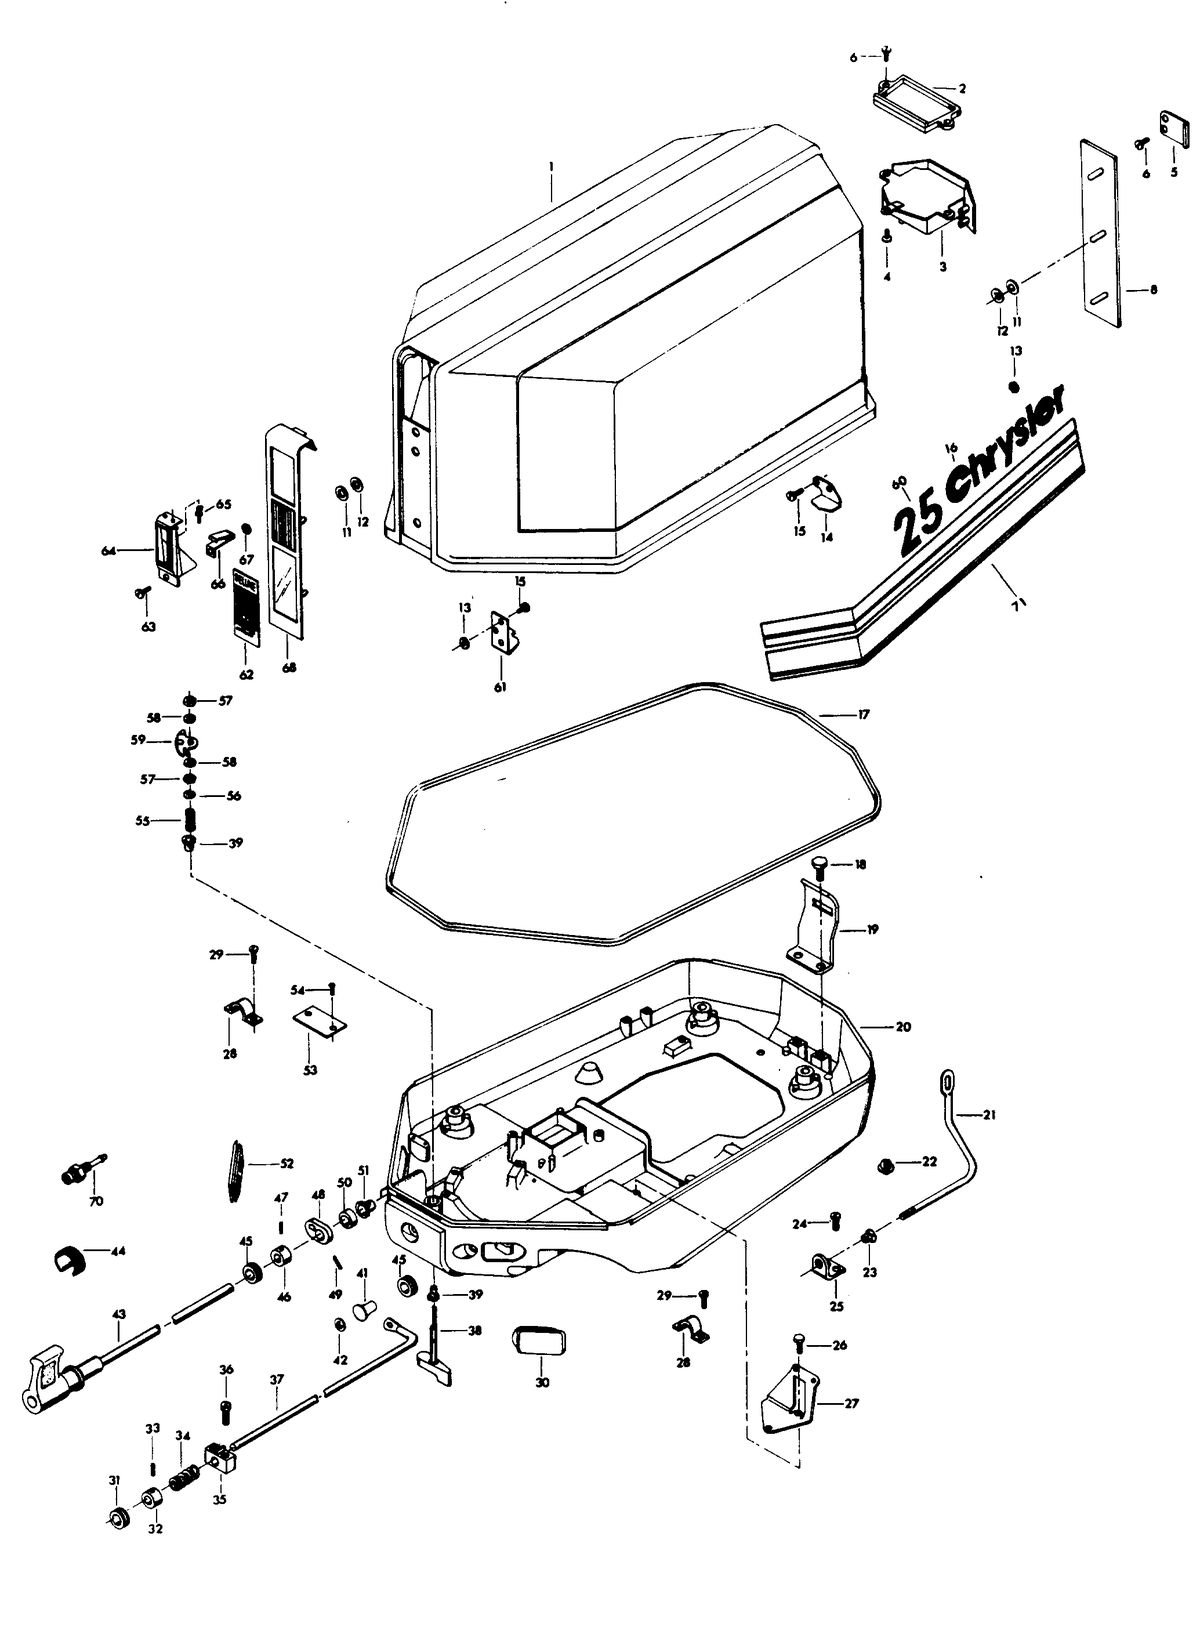 CHRYSLER 25 H.P. ENGINE COVER AND SUPPORT PLATE (MANUAL START MODELS)